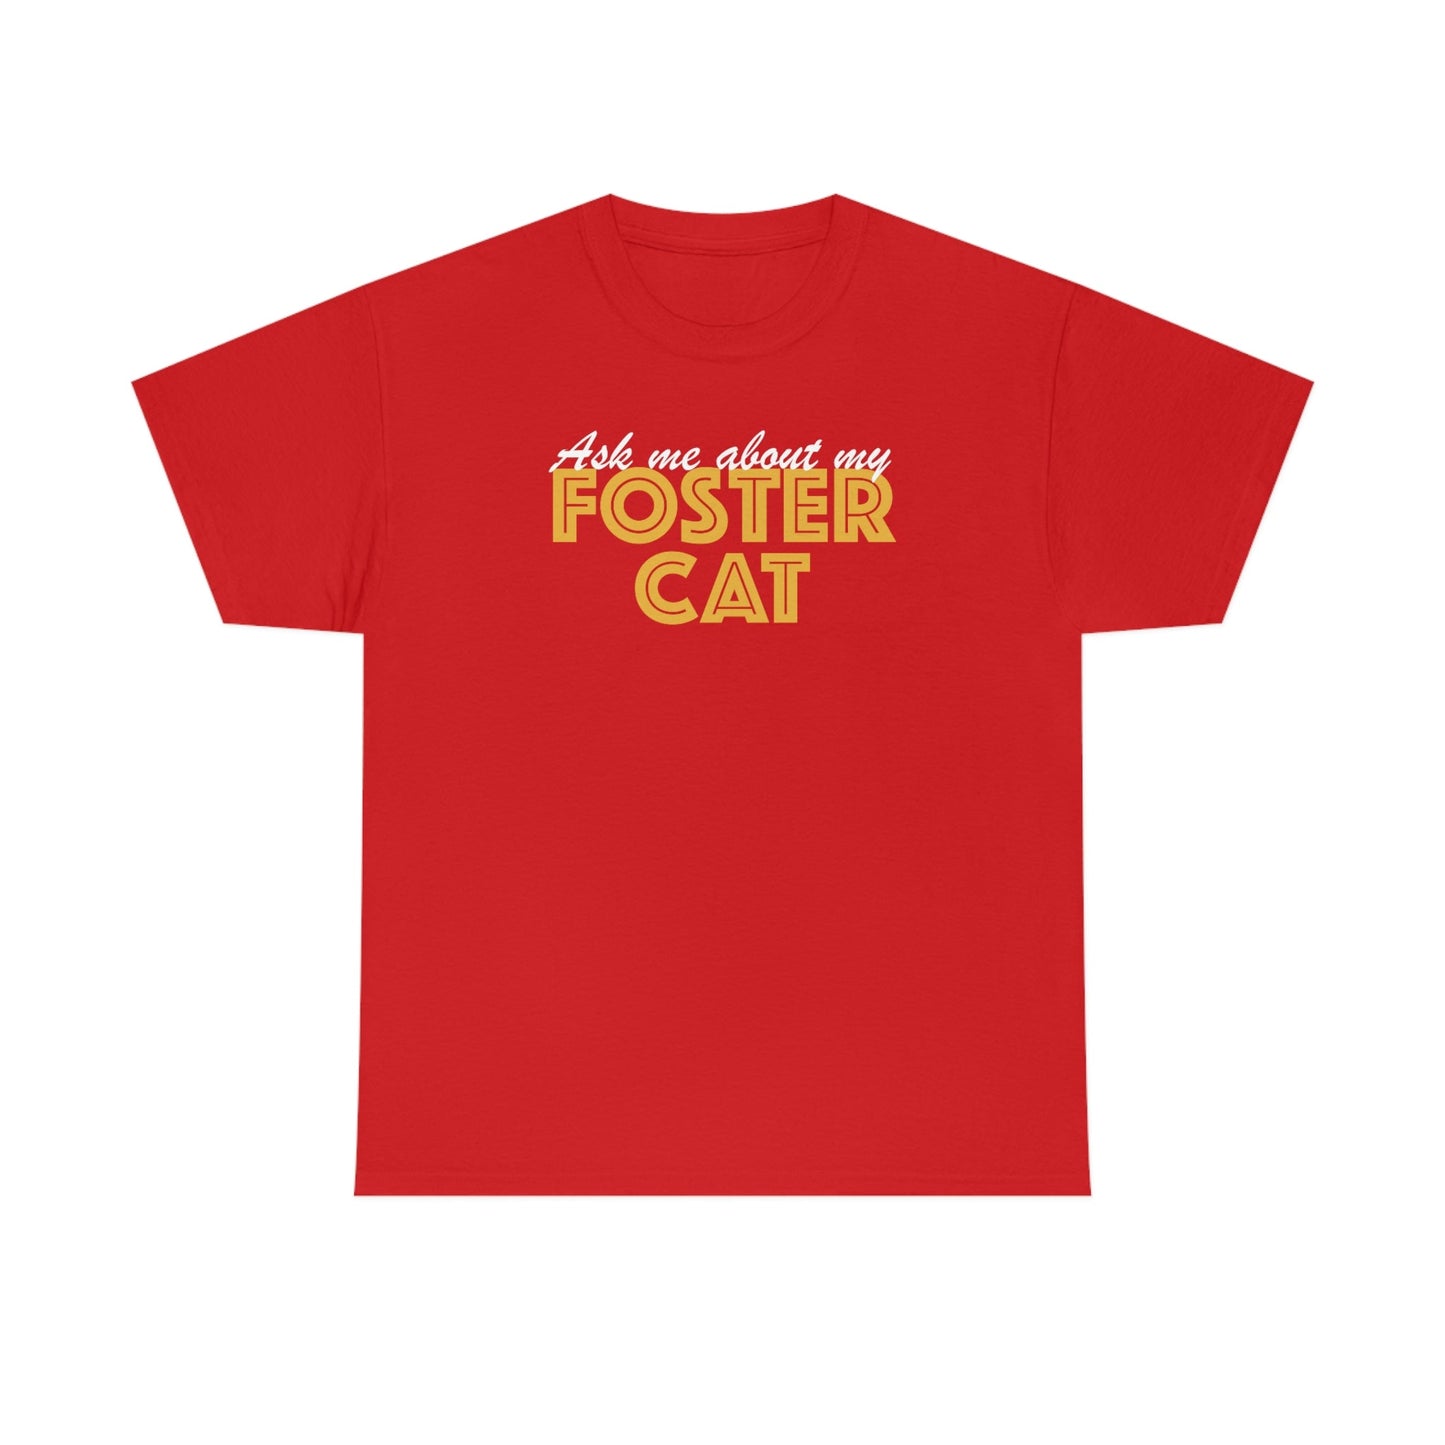 Ask Me About My Foster Cat | Text Tees - Detezi Designs-50826393105507039378